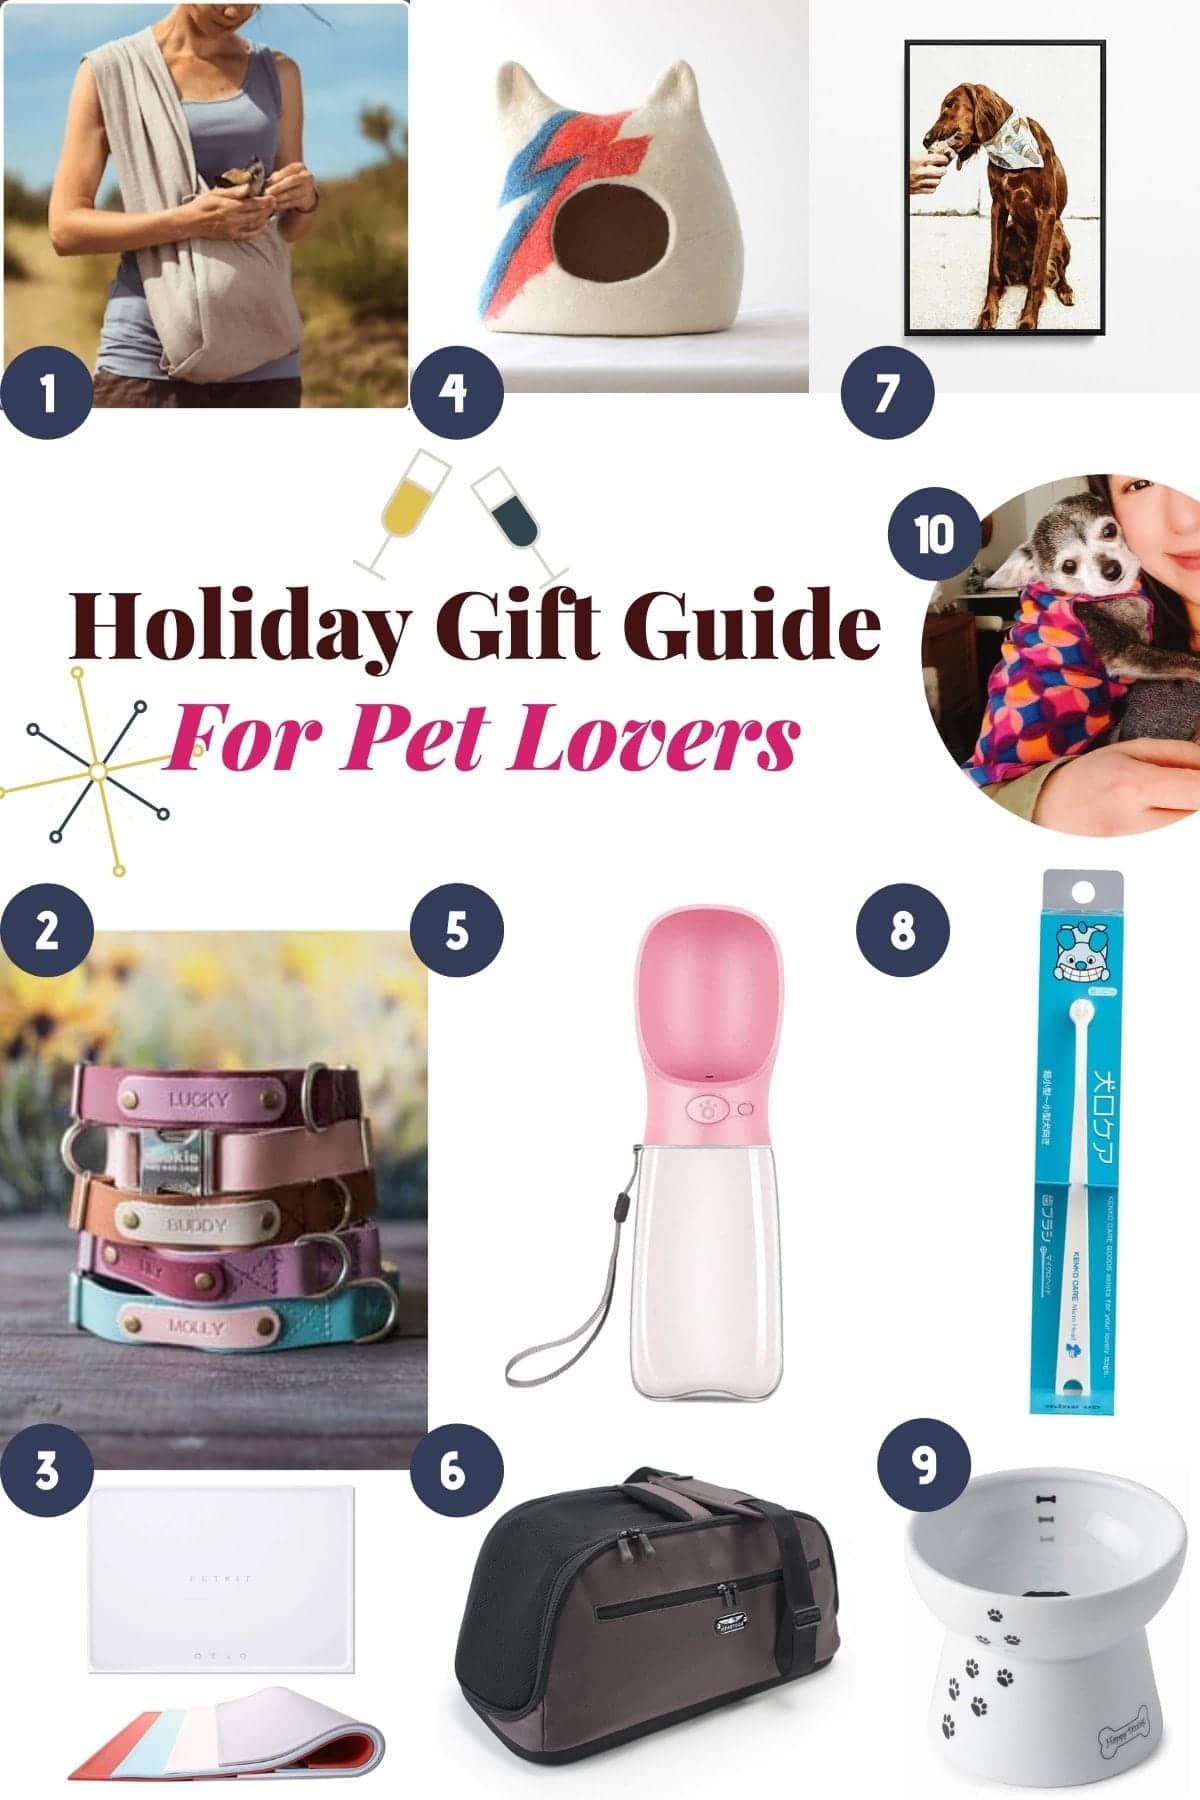 Photo shows a collage of holiday gift guide for pet lovers